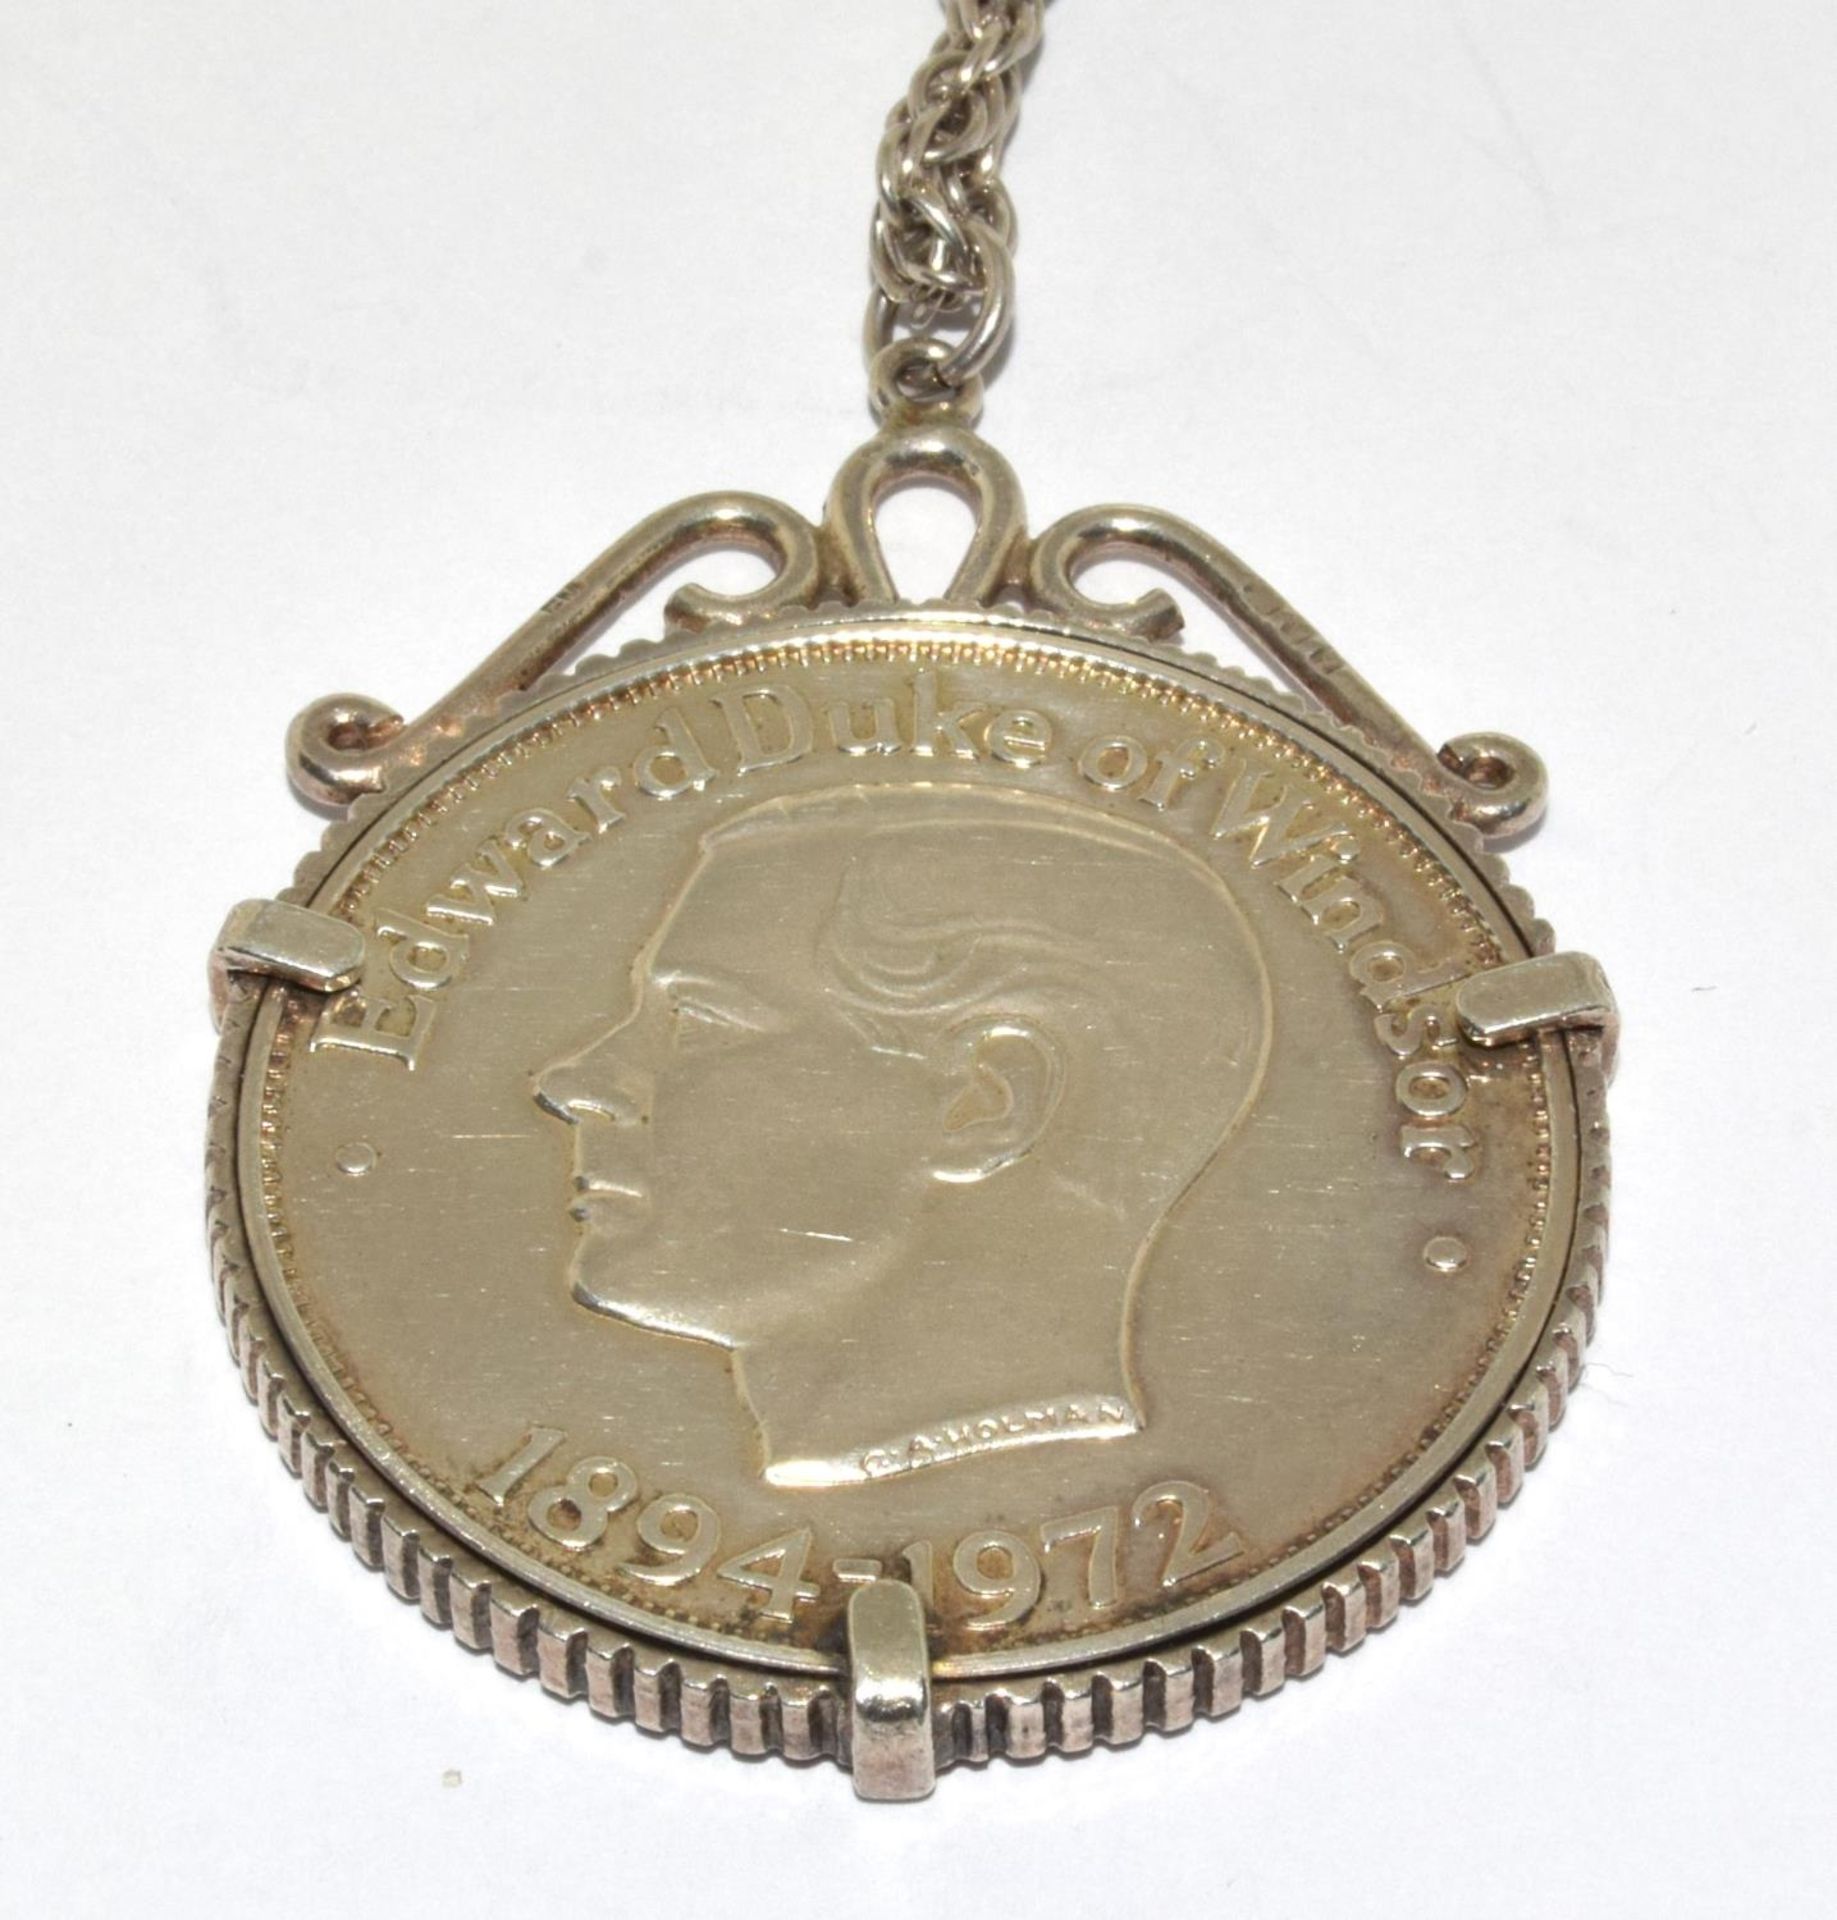 Silver "Duke of Windsor" coin on a neck chain 48g - Image 3 of 3